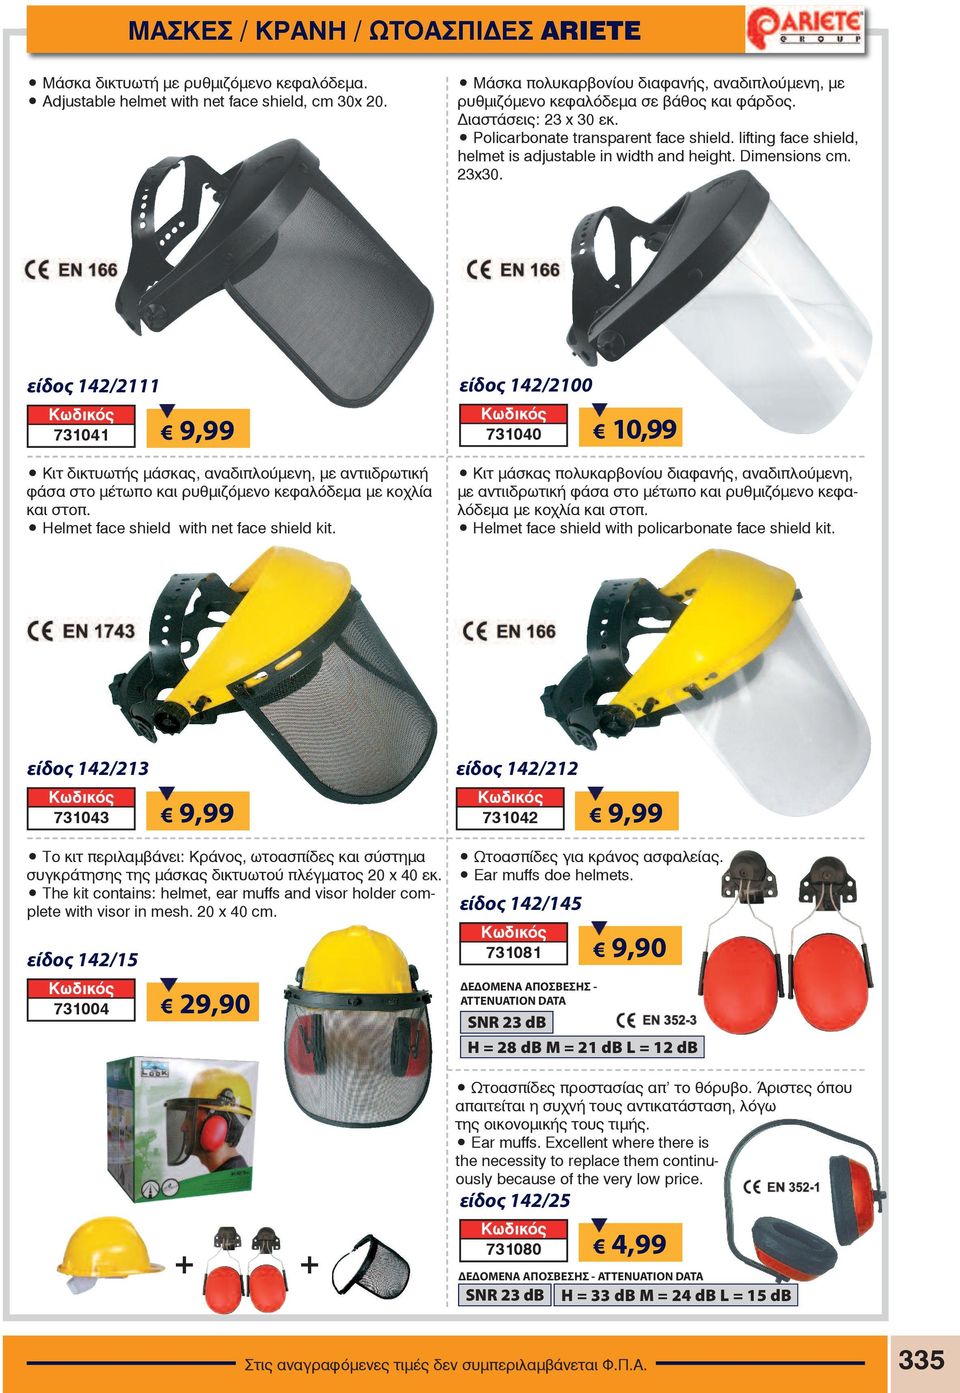 lifting face shield, helmet is adjustable in width and height. Dimensions cm. 23x30.